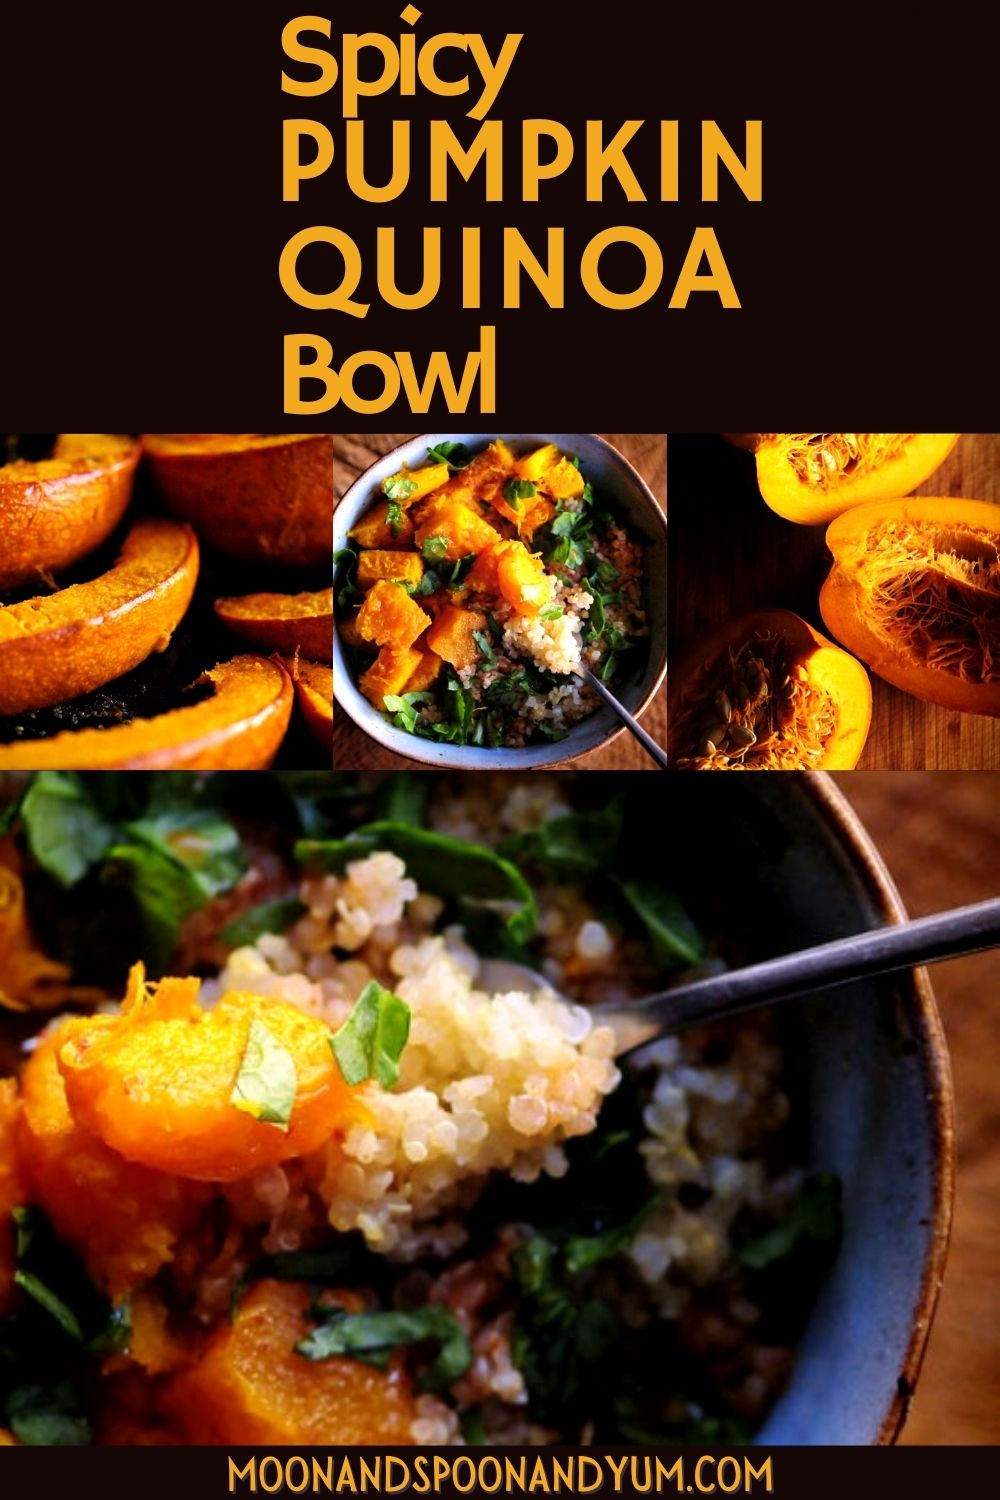 Spicy Pumpkin Quinoa Bowl Recipe - MOON and spoon and yum